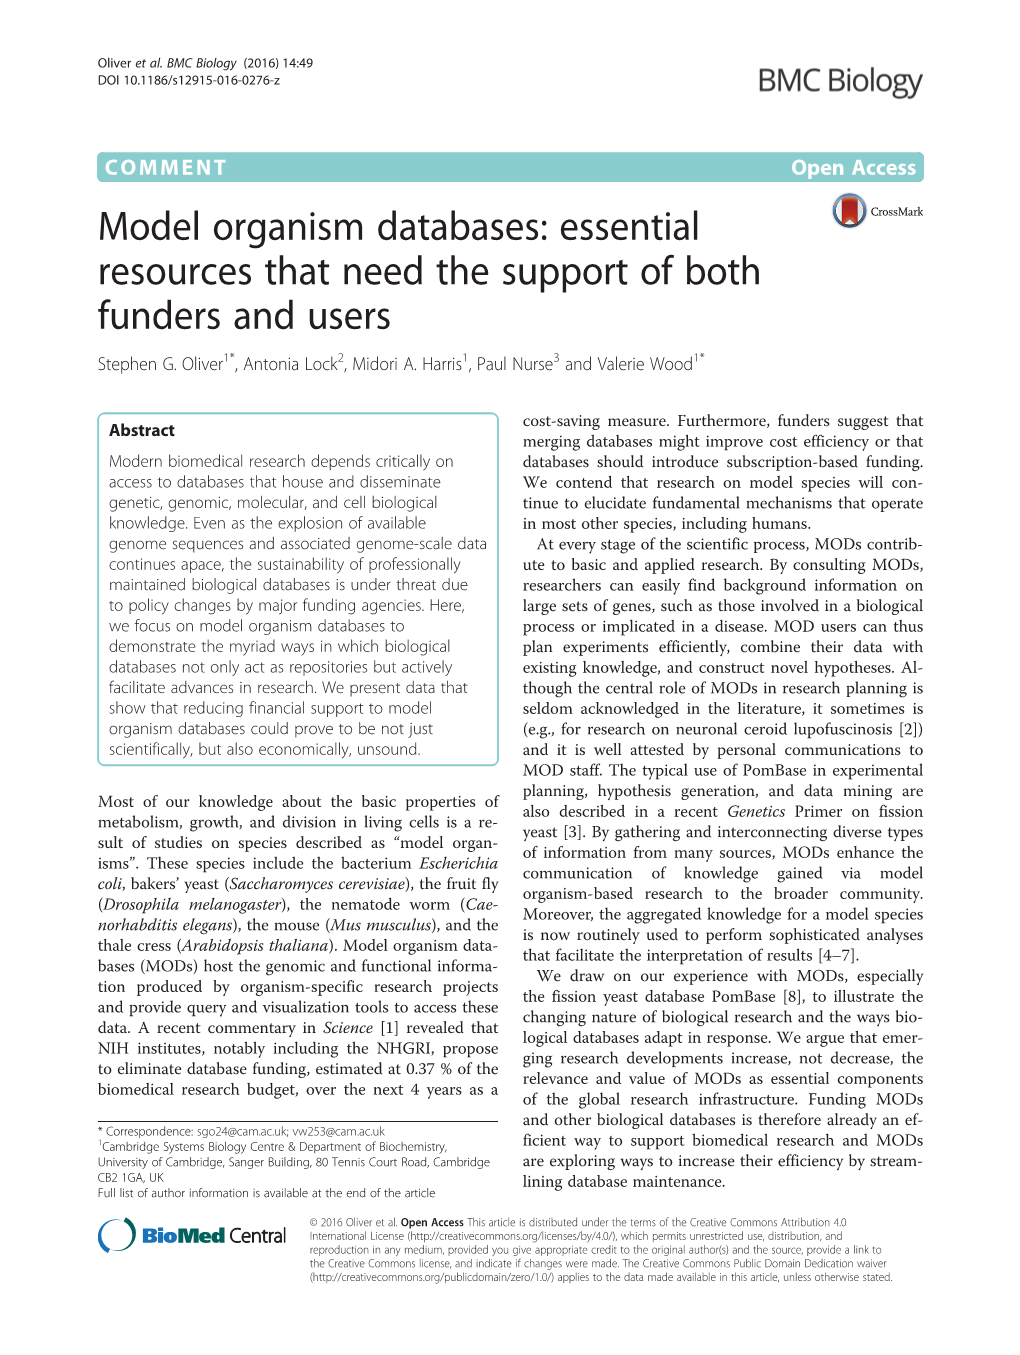 Model Organism Databases: Essential Resources That Need the Support of Both Funders and Users Stephen G